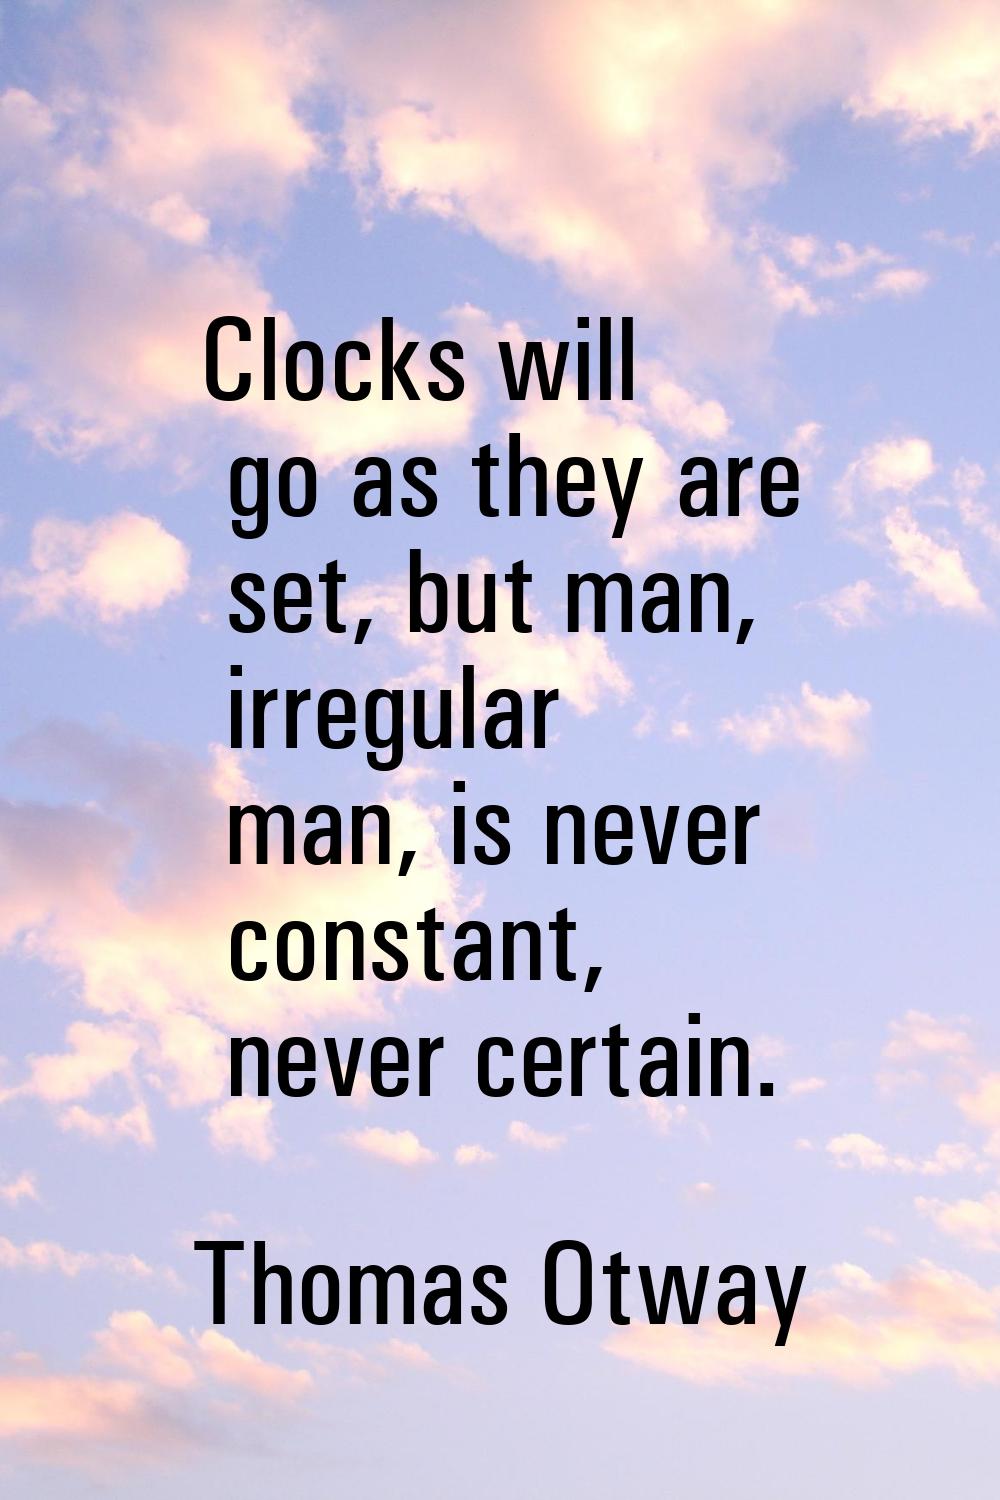 Clocks will go as they are set, but man, irregular man, is never constant, never certain.